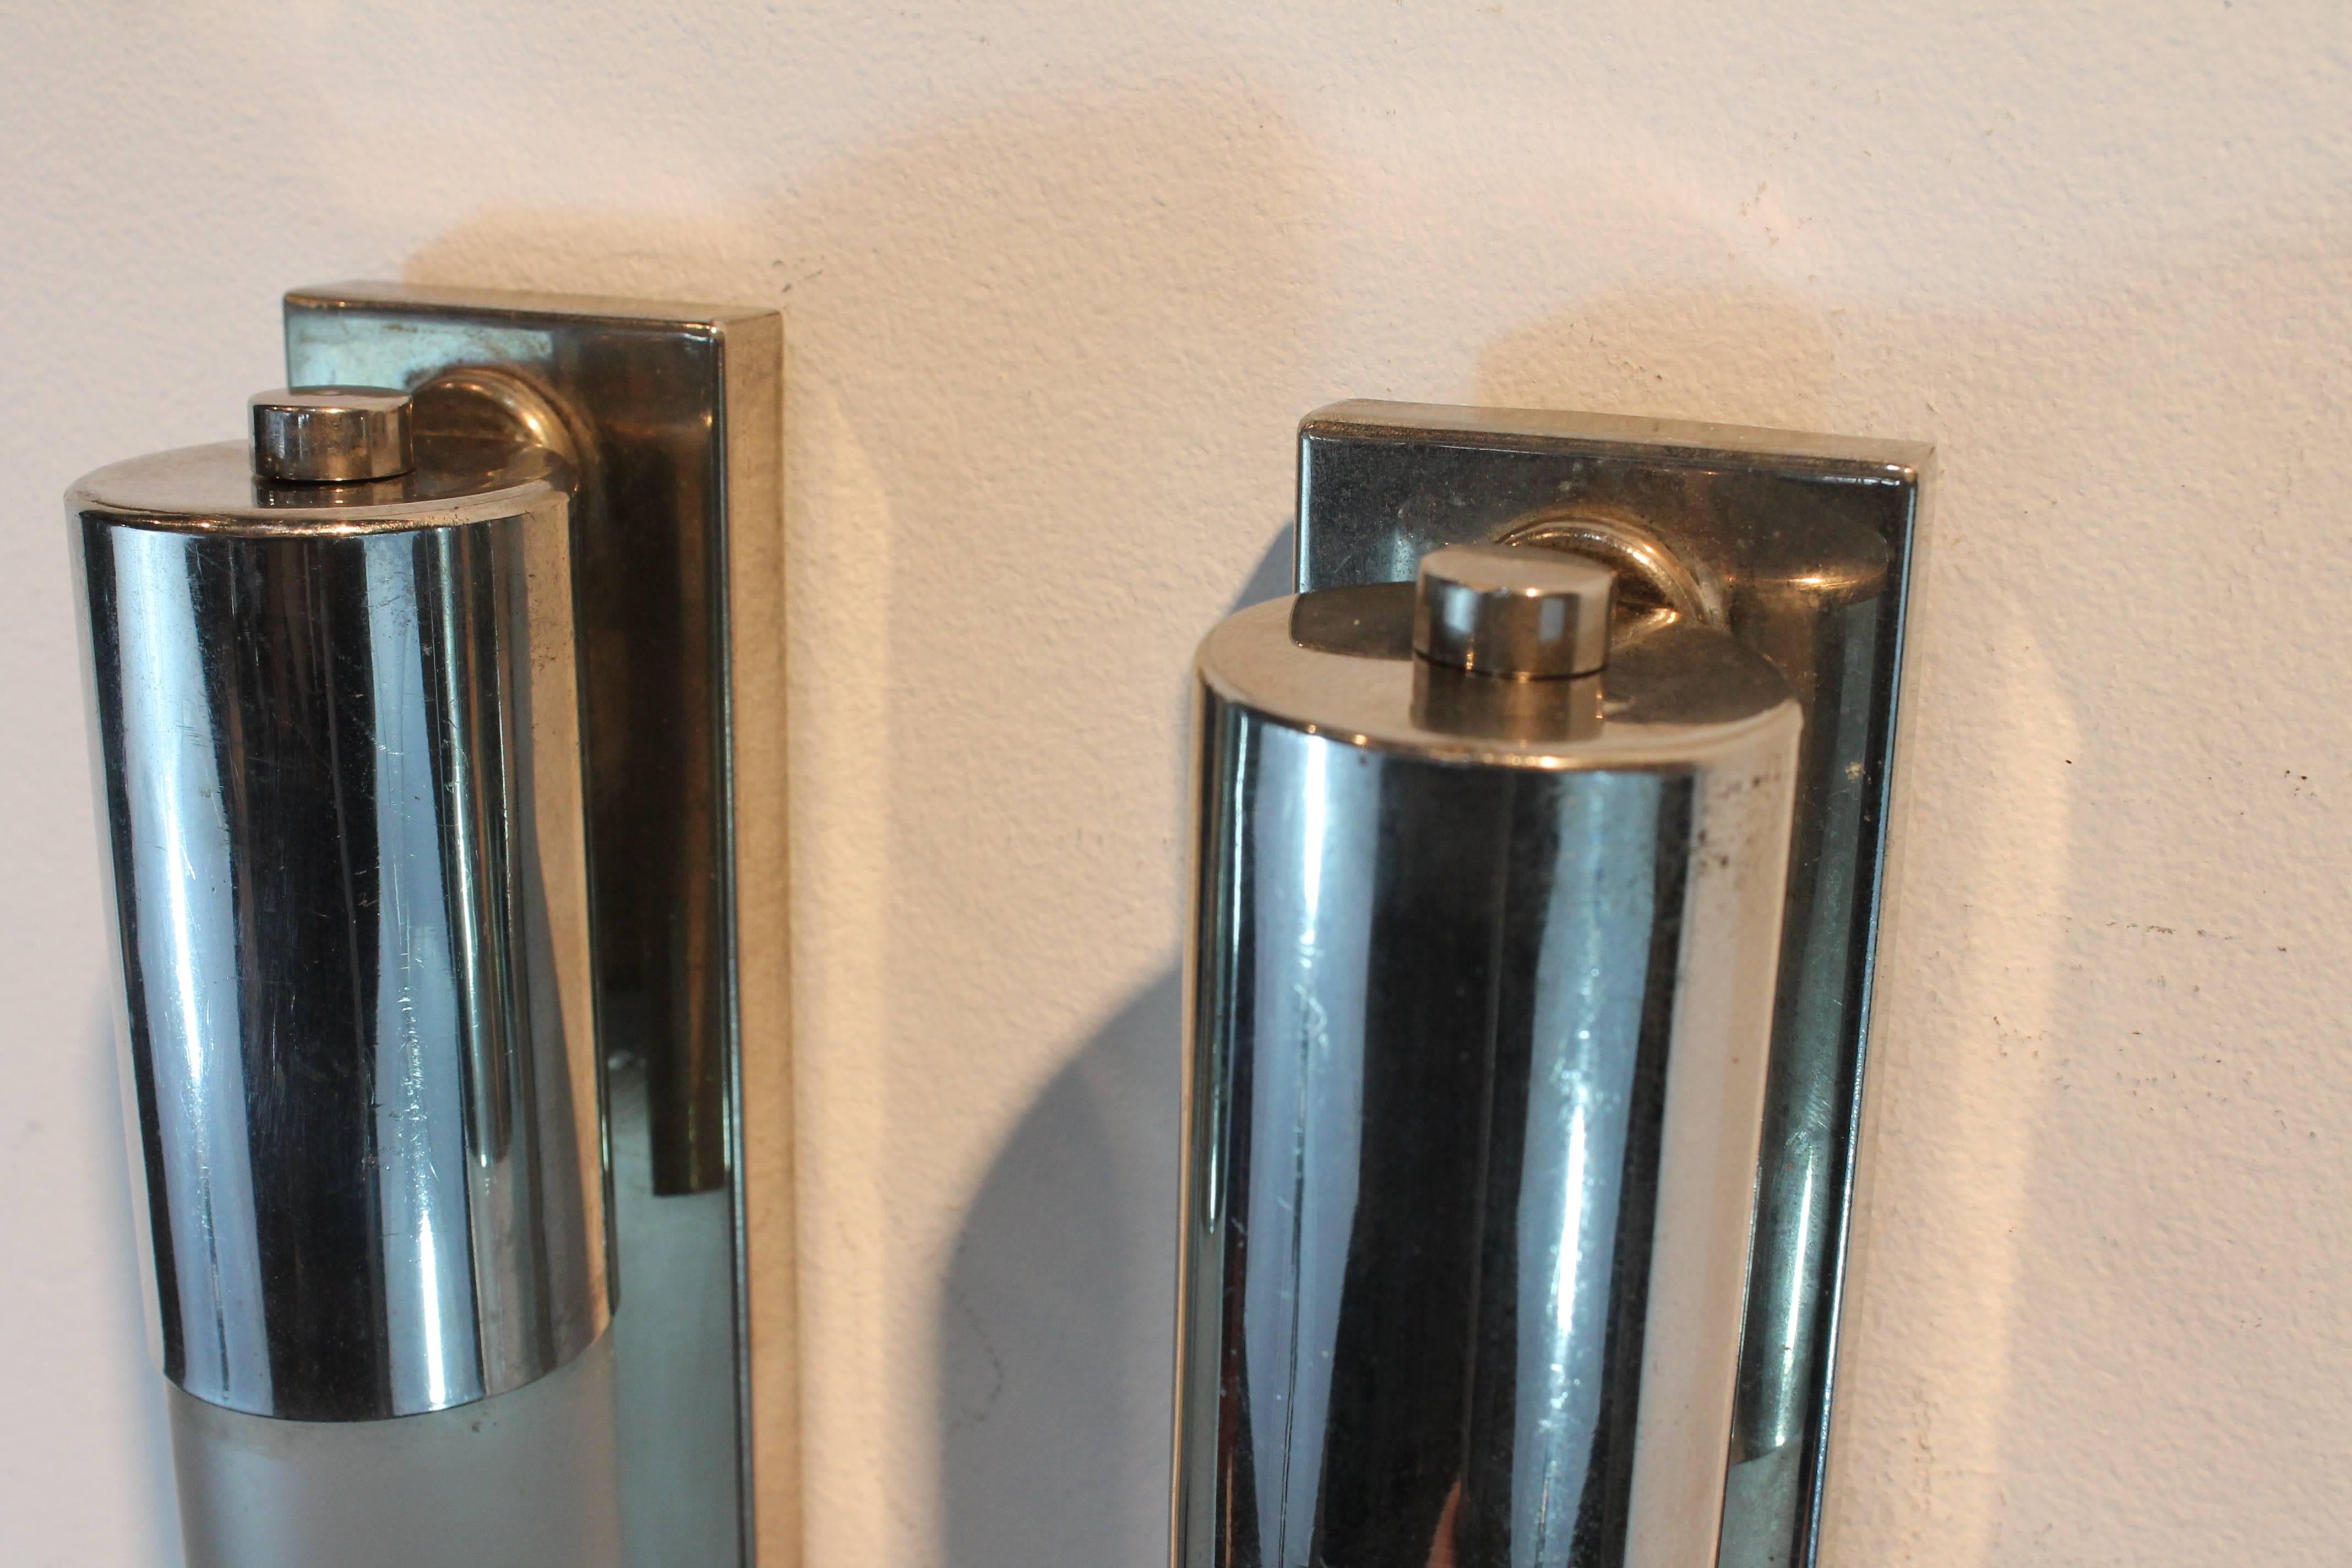 Minimal chrome Art Deco sconces that can be hung vertically or horizontally.
The chrome caps unscrew on each side to remove the chrome sleeves to change the frosted bulbs.